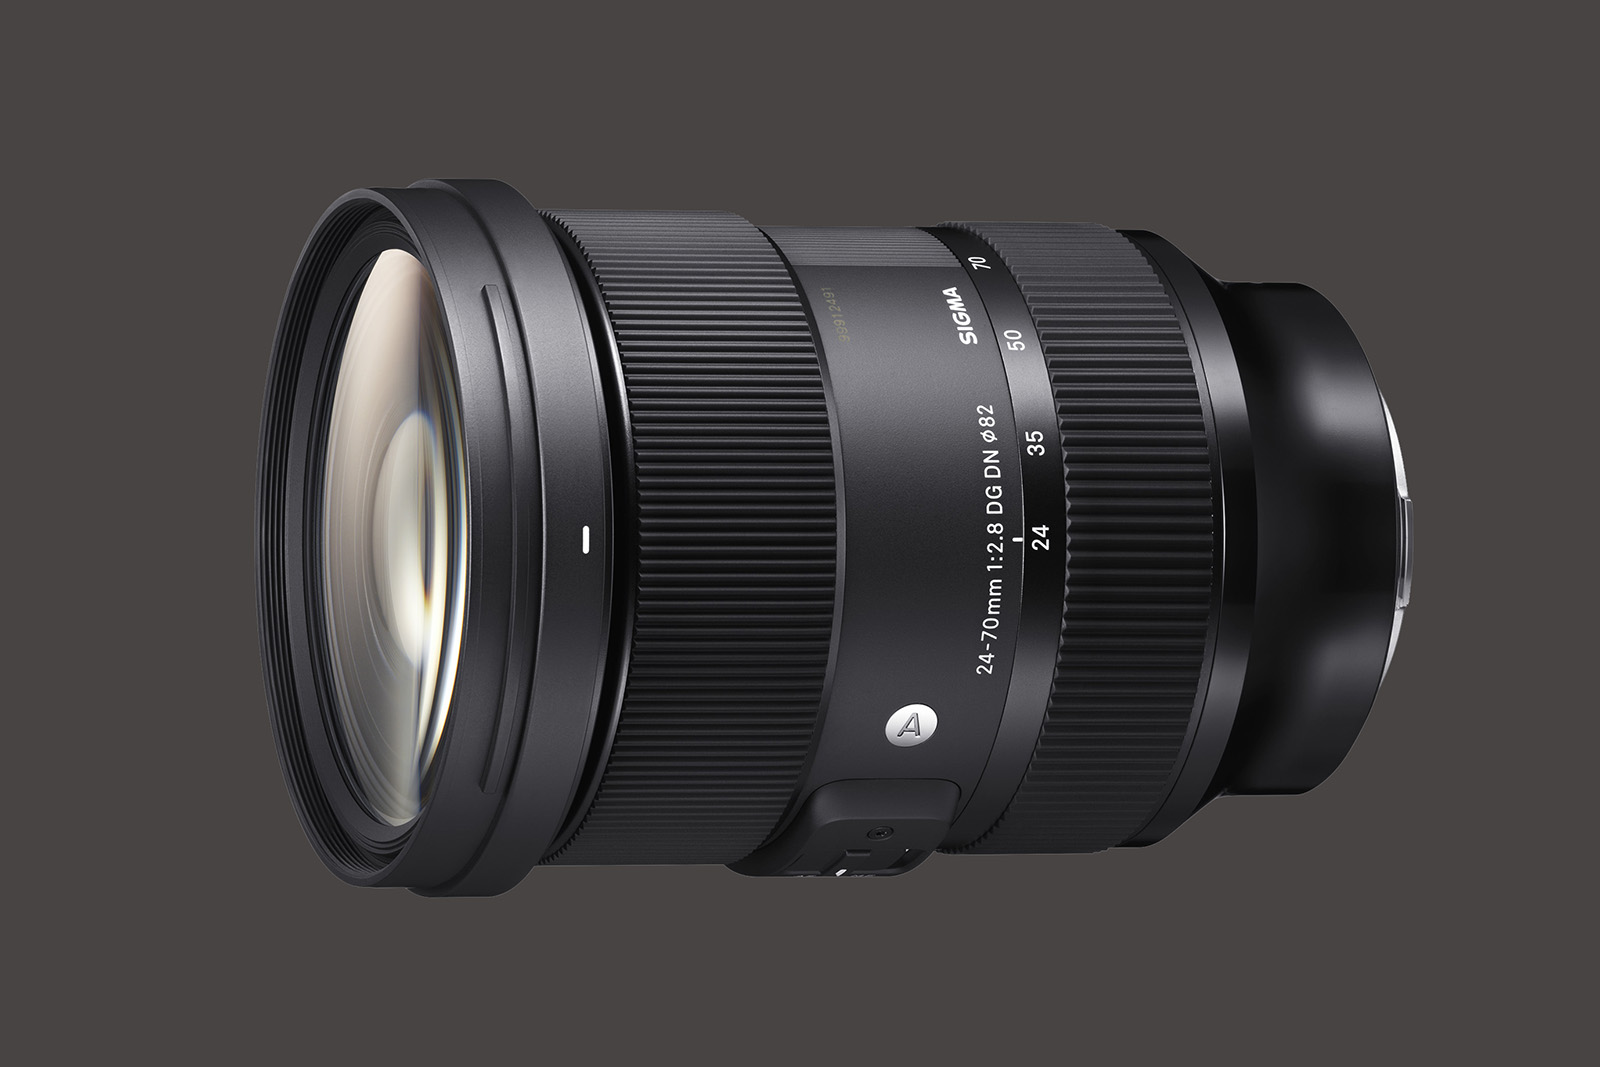 The Sigma 24-70mm F/2.8 DG DN Art is Made for Mirrorless | Digital